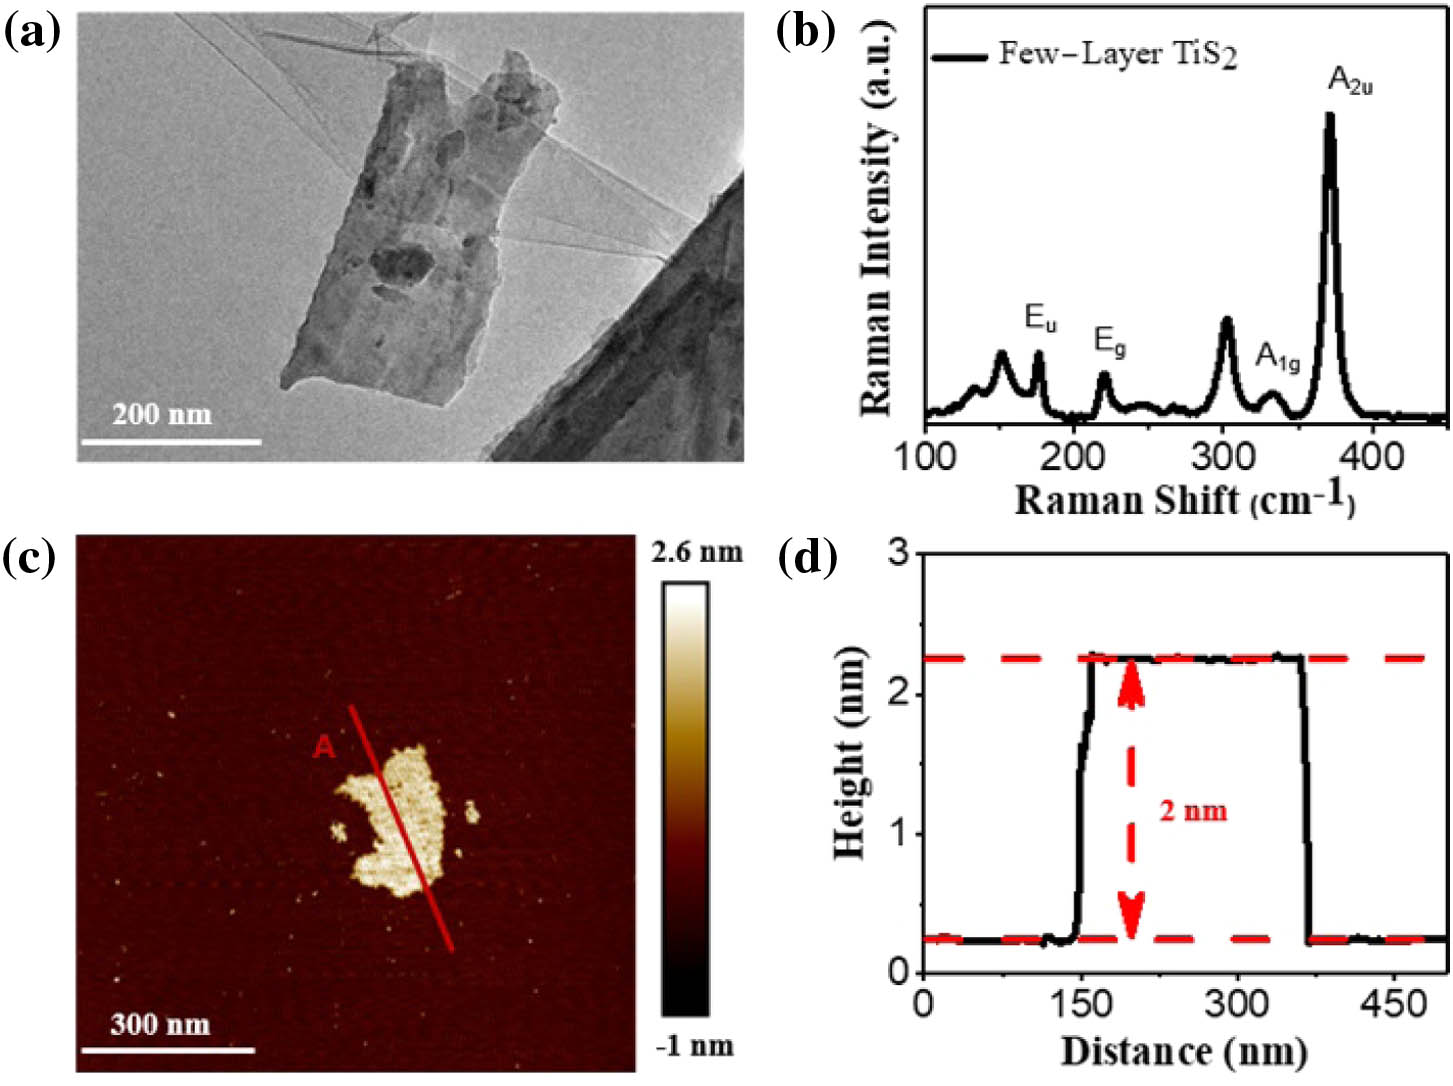 Characterization of the few-layer TiS2 nanosheets: (a) TEM image of the TiS2 nanosheets; (b) corresponding Raman spectrum of few-layer TiS2 nanosheets; (c) AFM image of few-layer TiS2 nanosheets; (d) height profile of the section marked in (c).